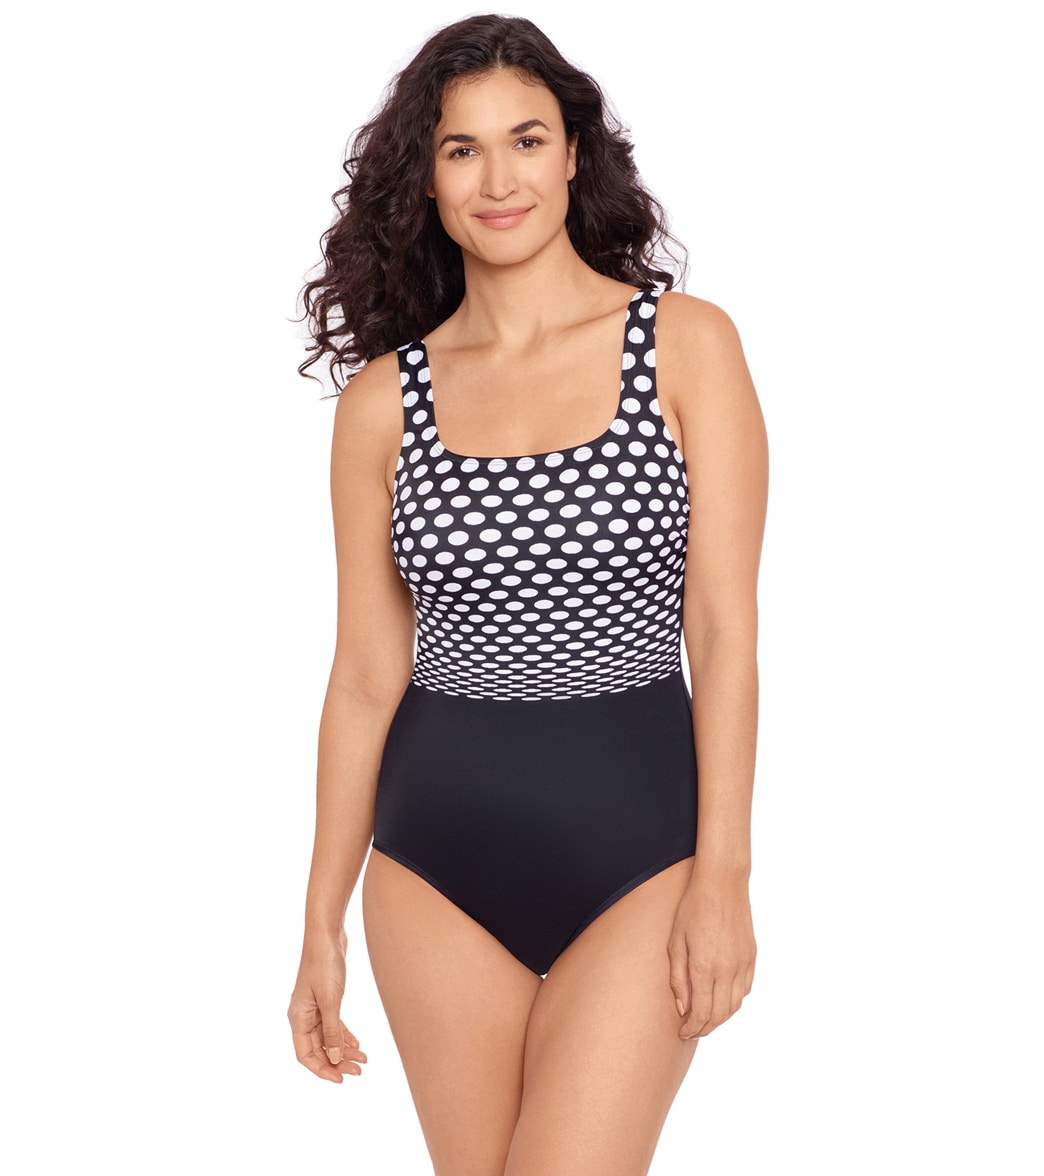 Reebok Women's Covered In Dots Chlorine Resistant One Piece Swimsuit - Black/White 12 - Swimoutlet.com